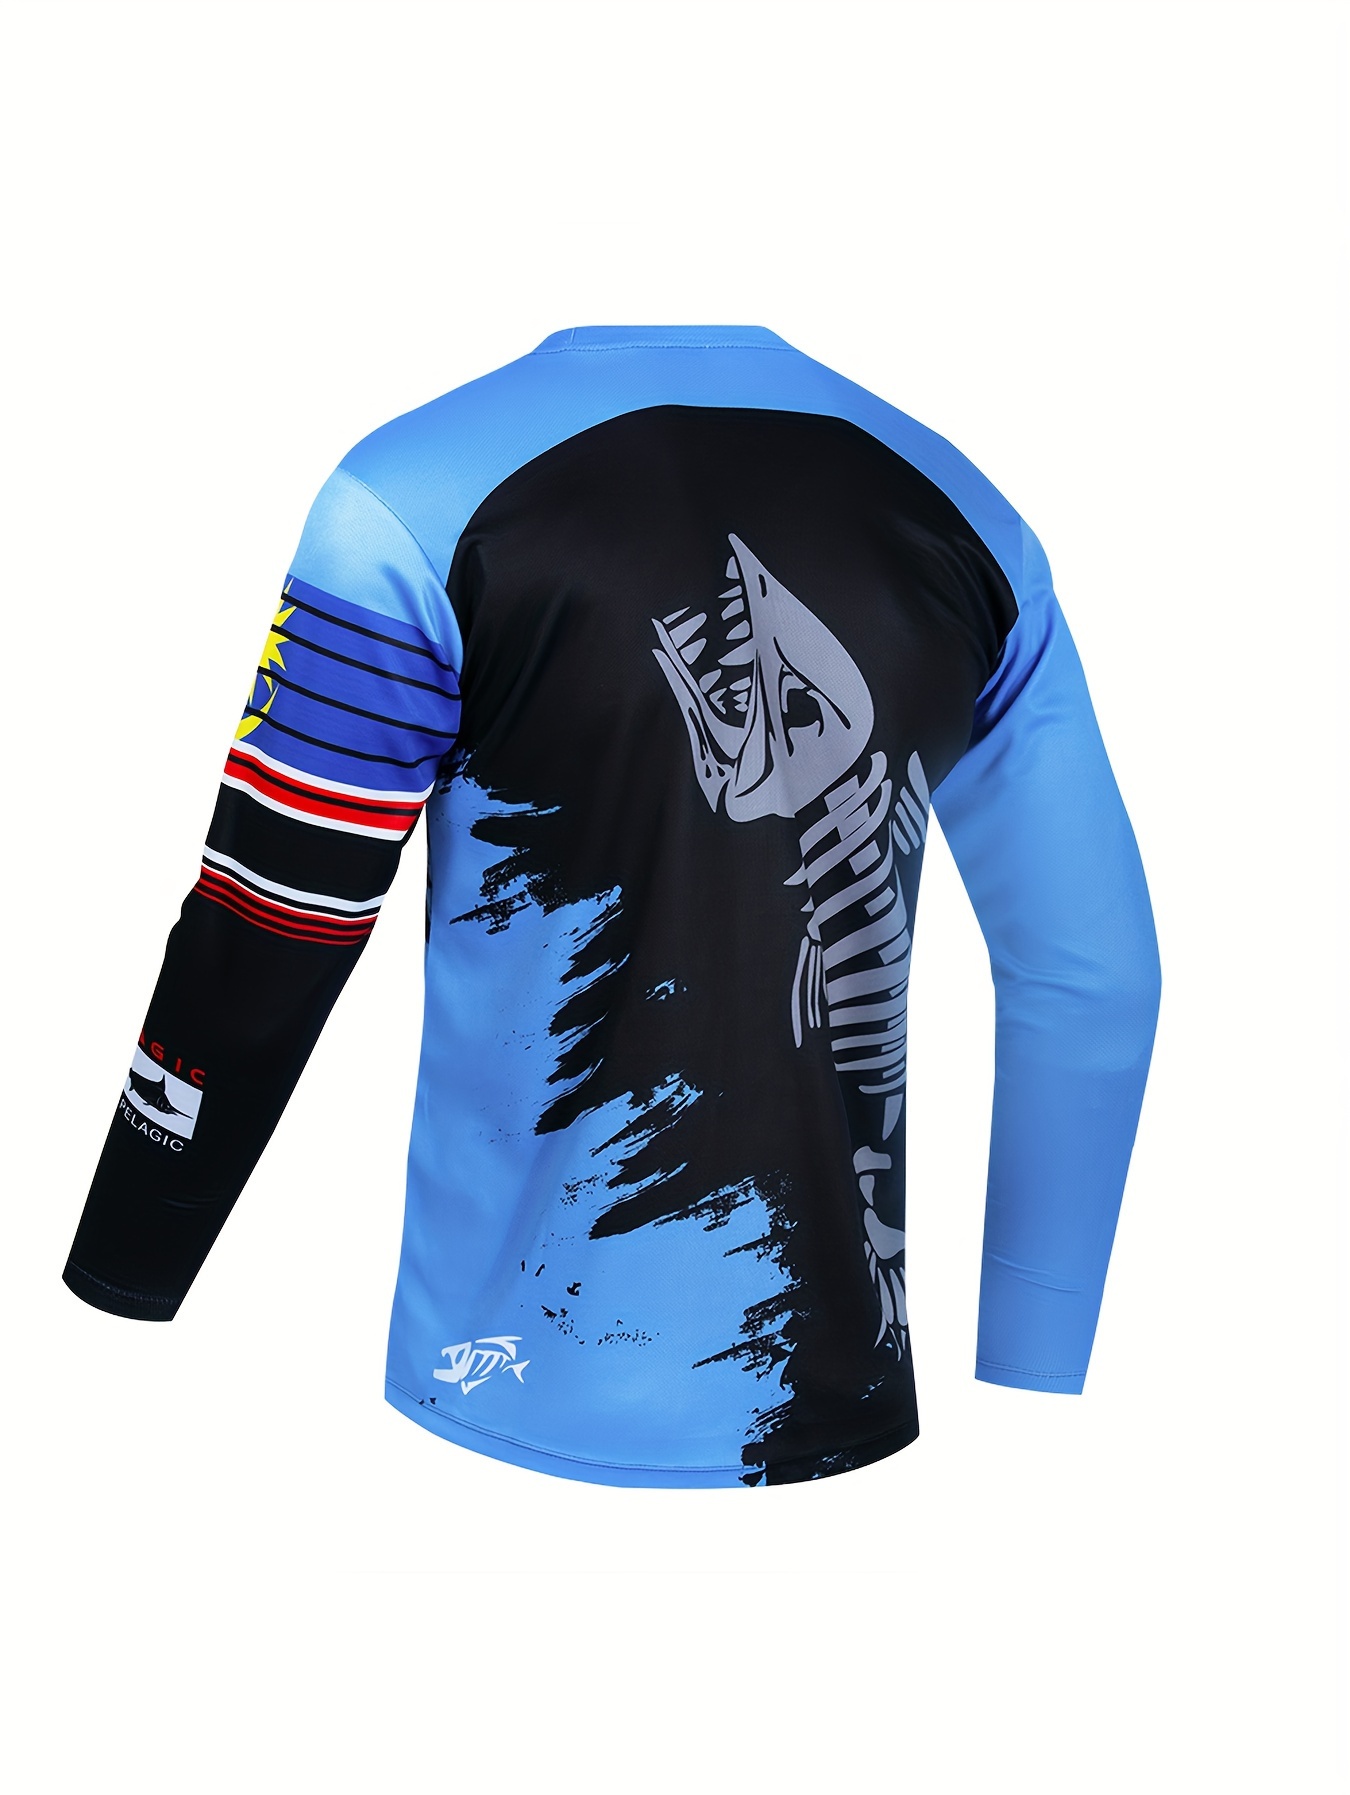 Men's Color Matching Shark Skull Graphic Print Cycling Jersey, Bike Jersey, Active Breathable Moisture Wicking Long Sleeve Crew Neck Shirt for